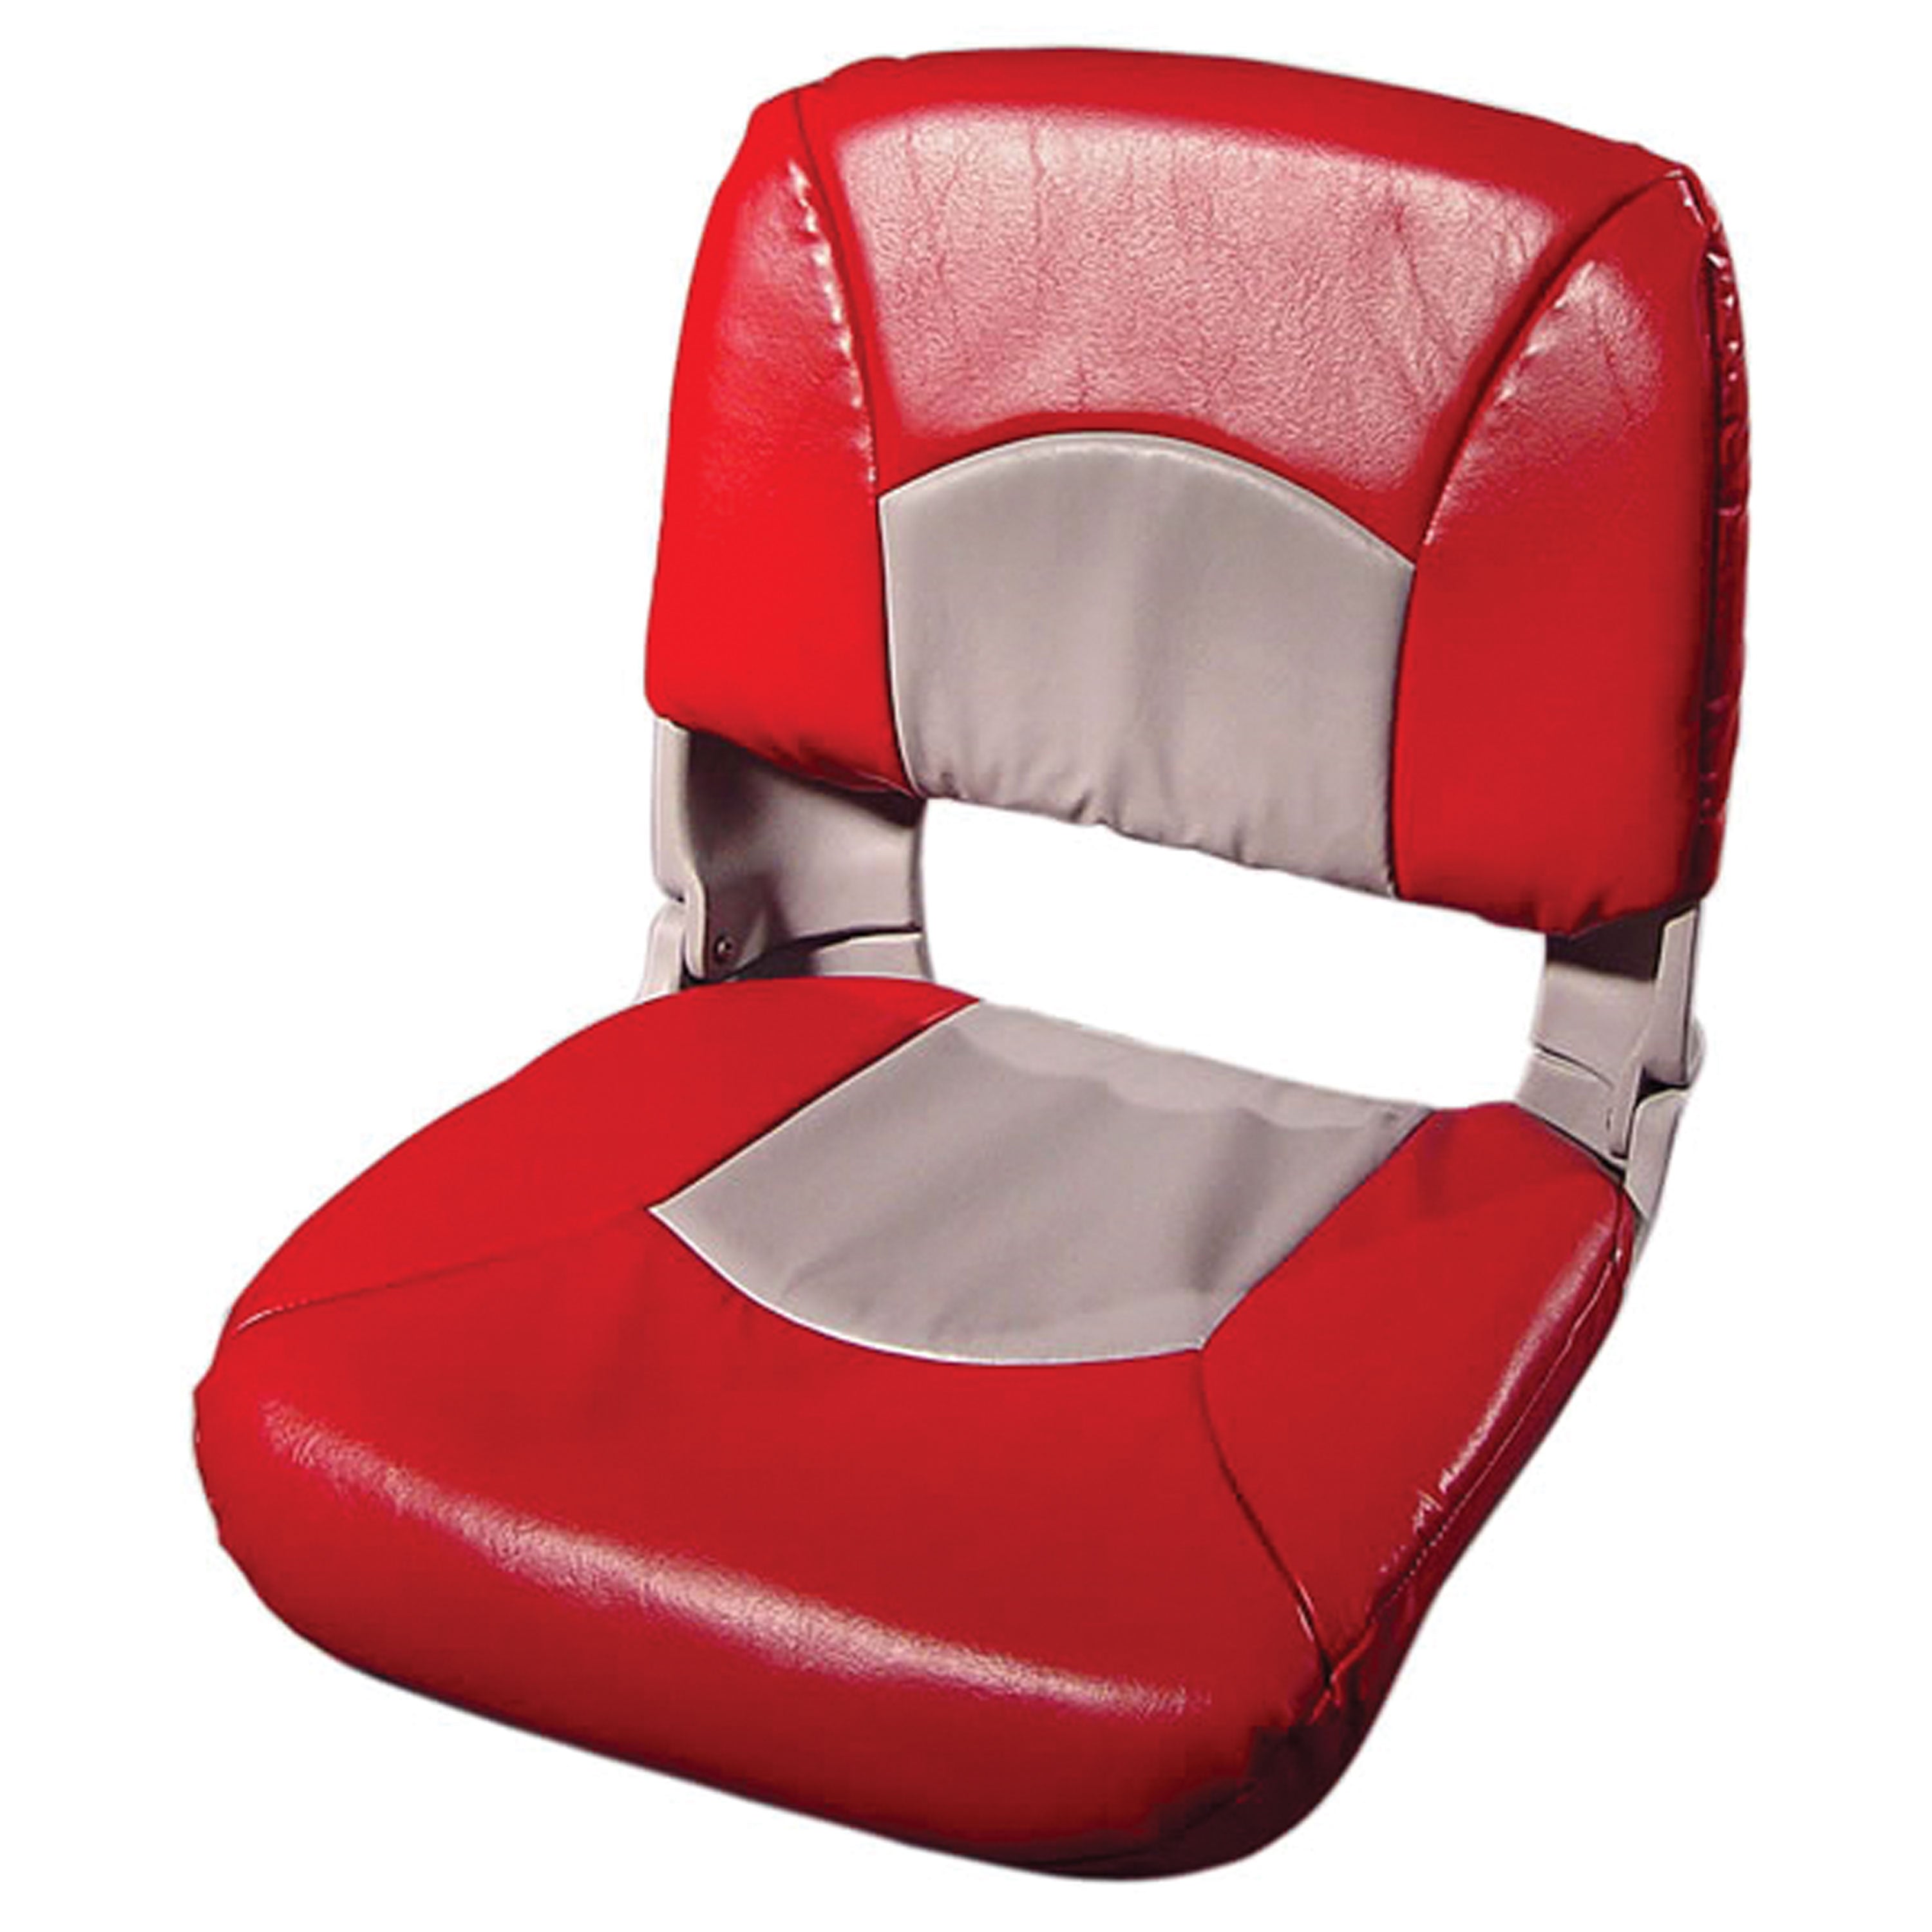 Tempress 45611 All-Weather High-Back Boat Seat - Red/Gray